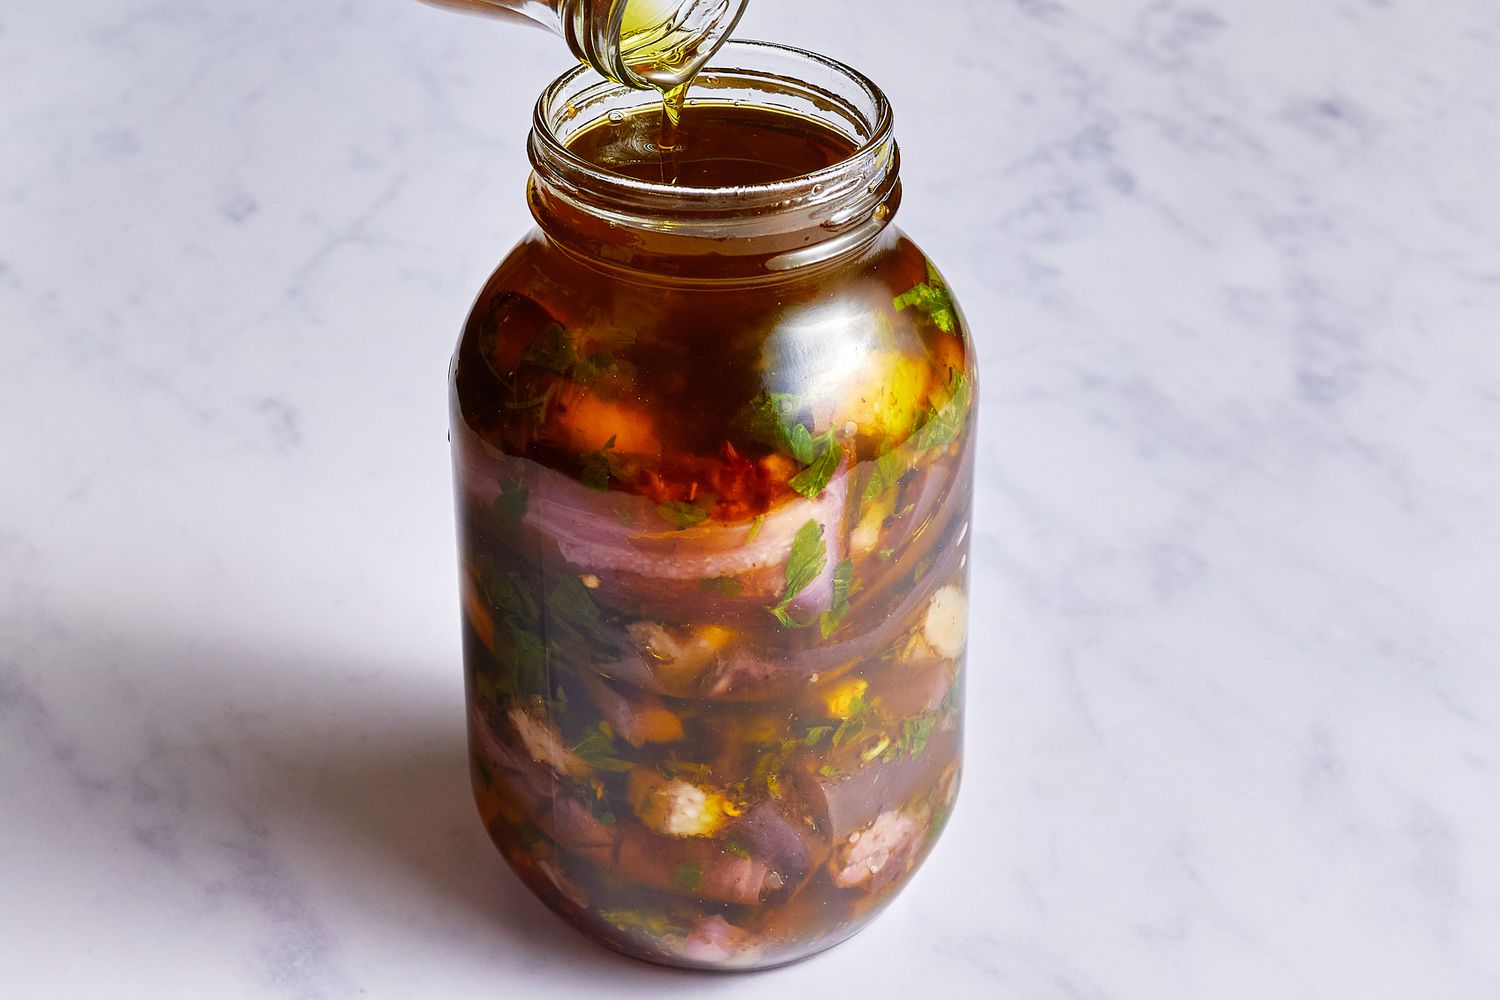 Oil being poured over eggplant mixture in the jar